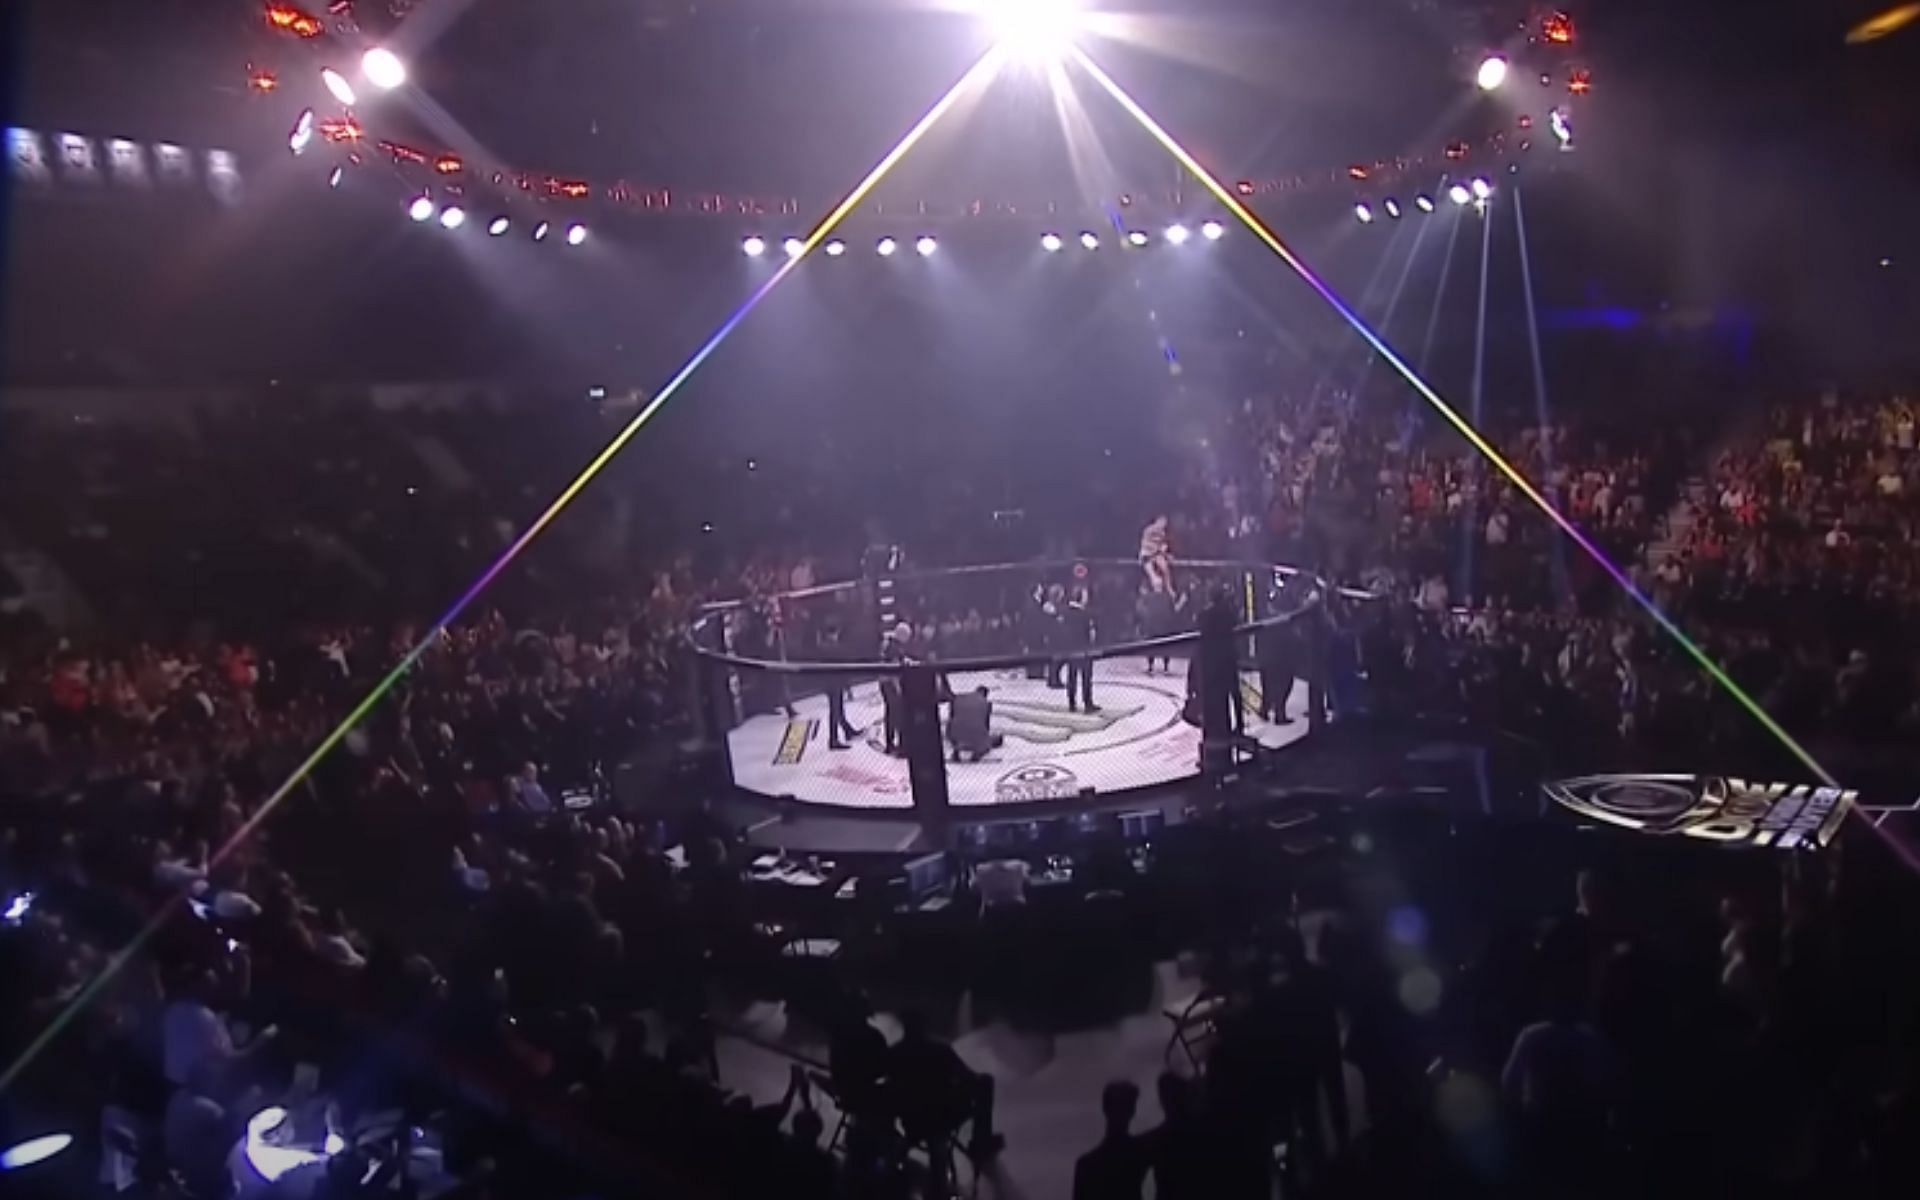 An undefeated Bellator champion [Cage, pictured] intends to test free agency in 2025 [Image courtesy: BellatorMMA - YouTube]